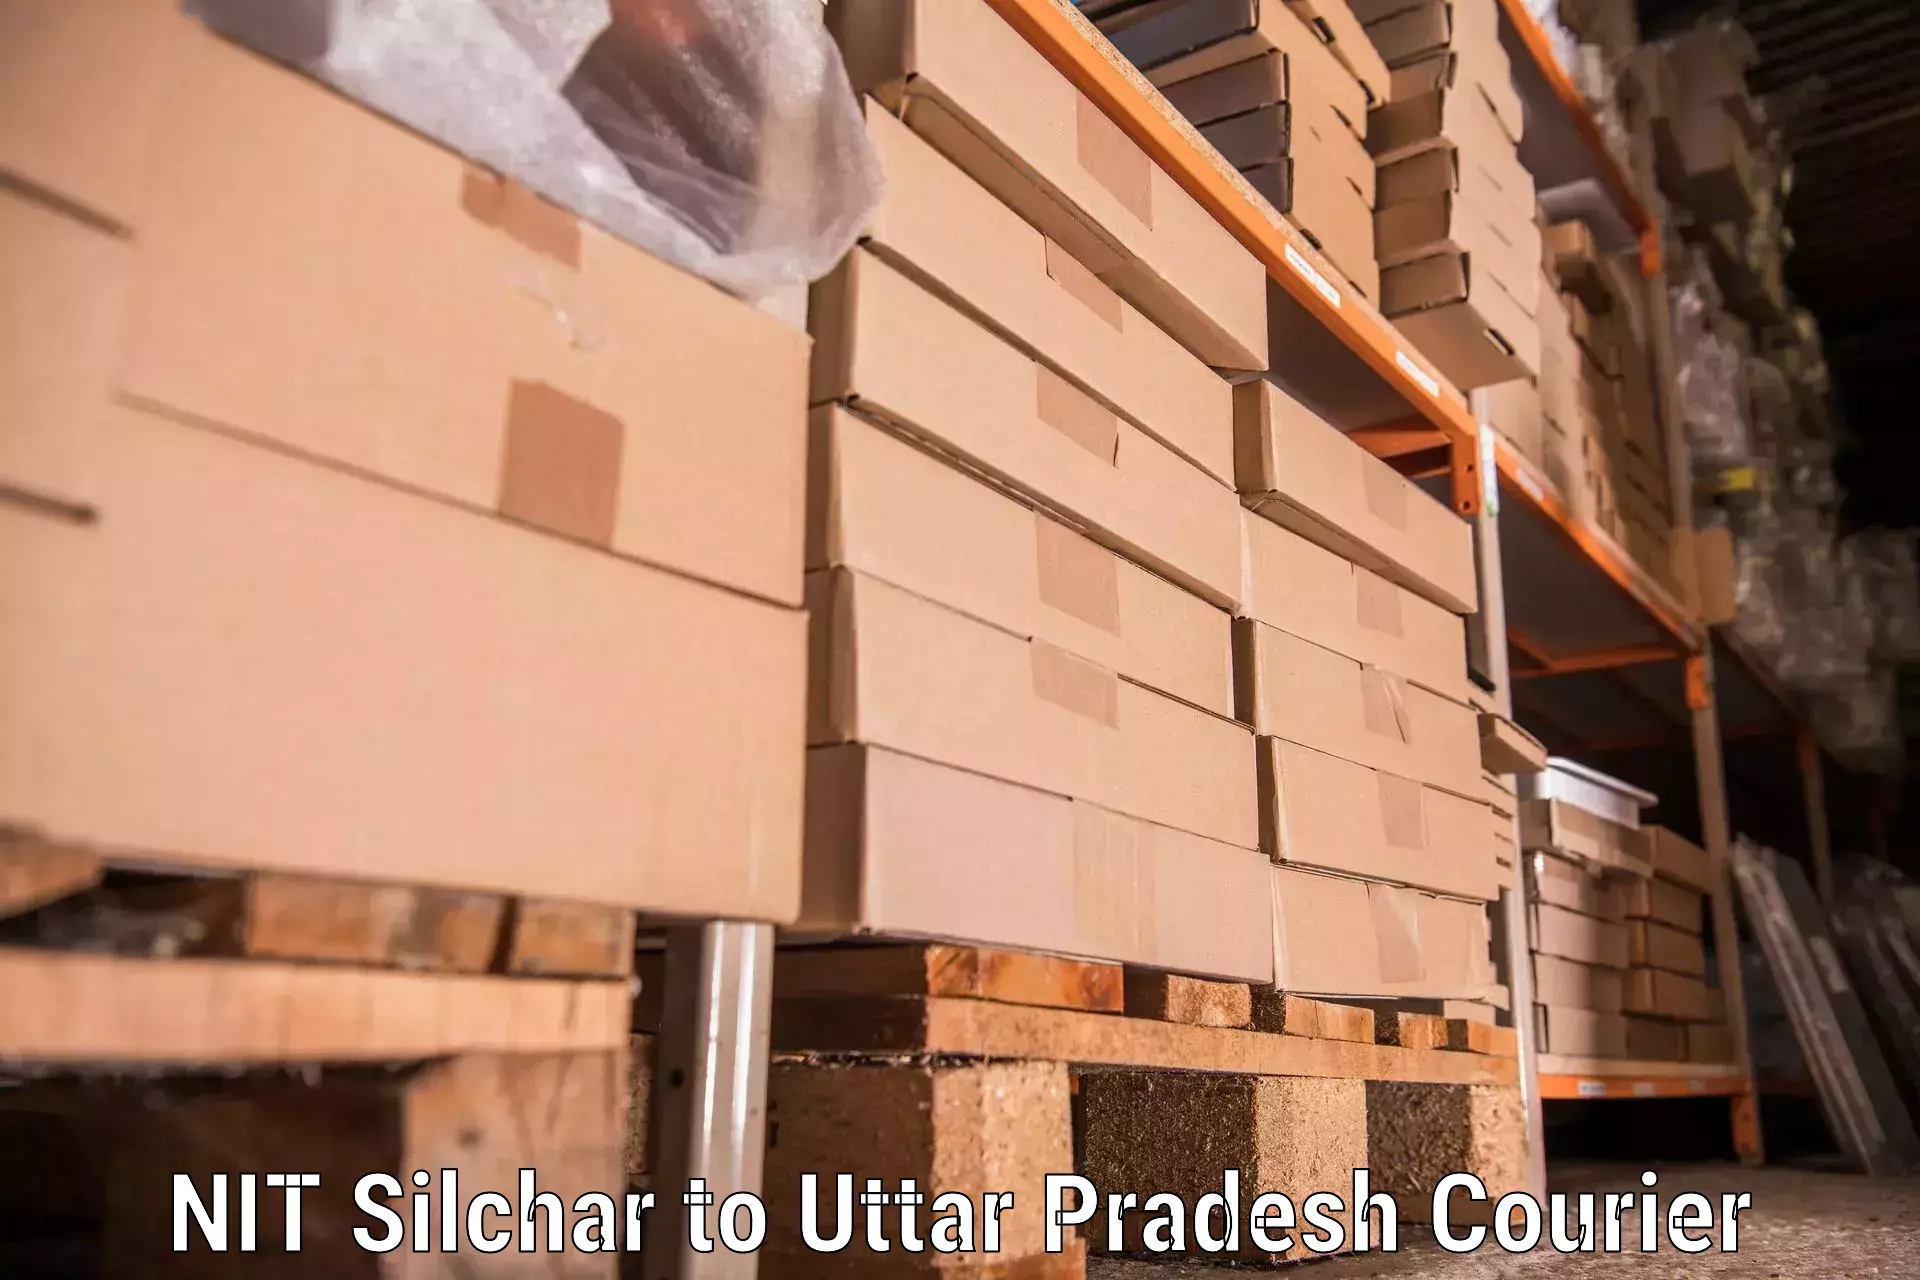 Professional moving assistance NIT Silchar to Lalitpur